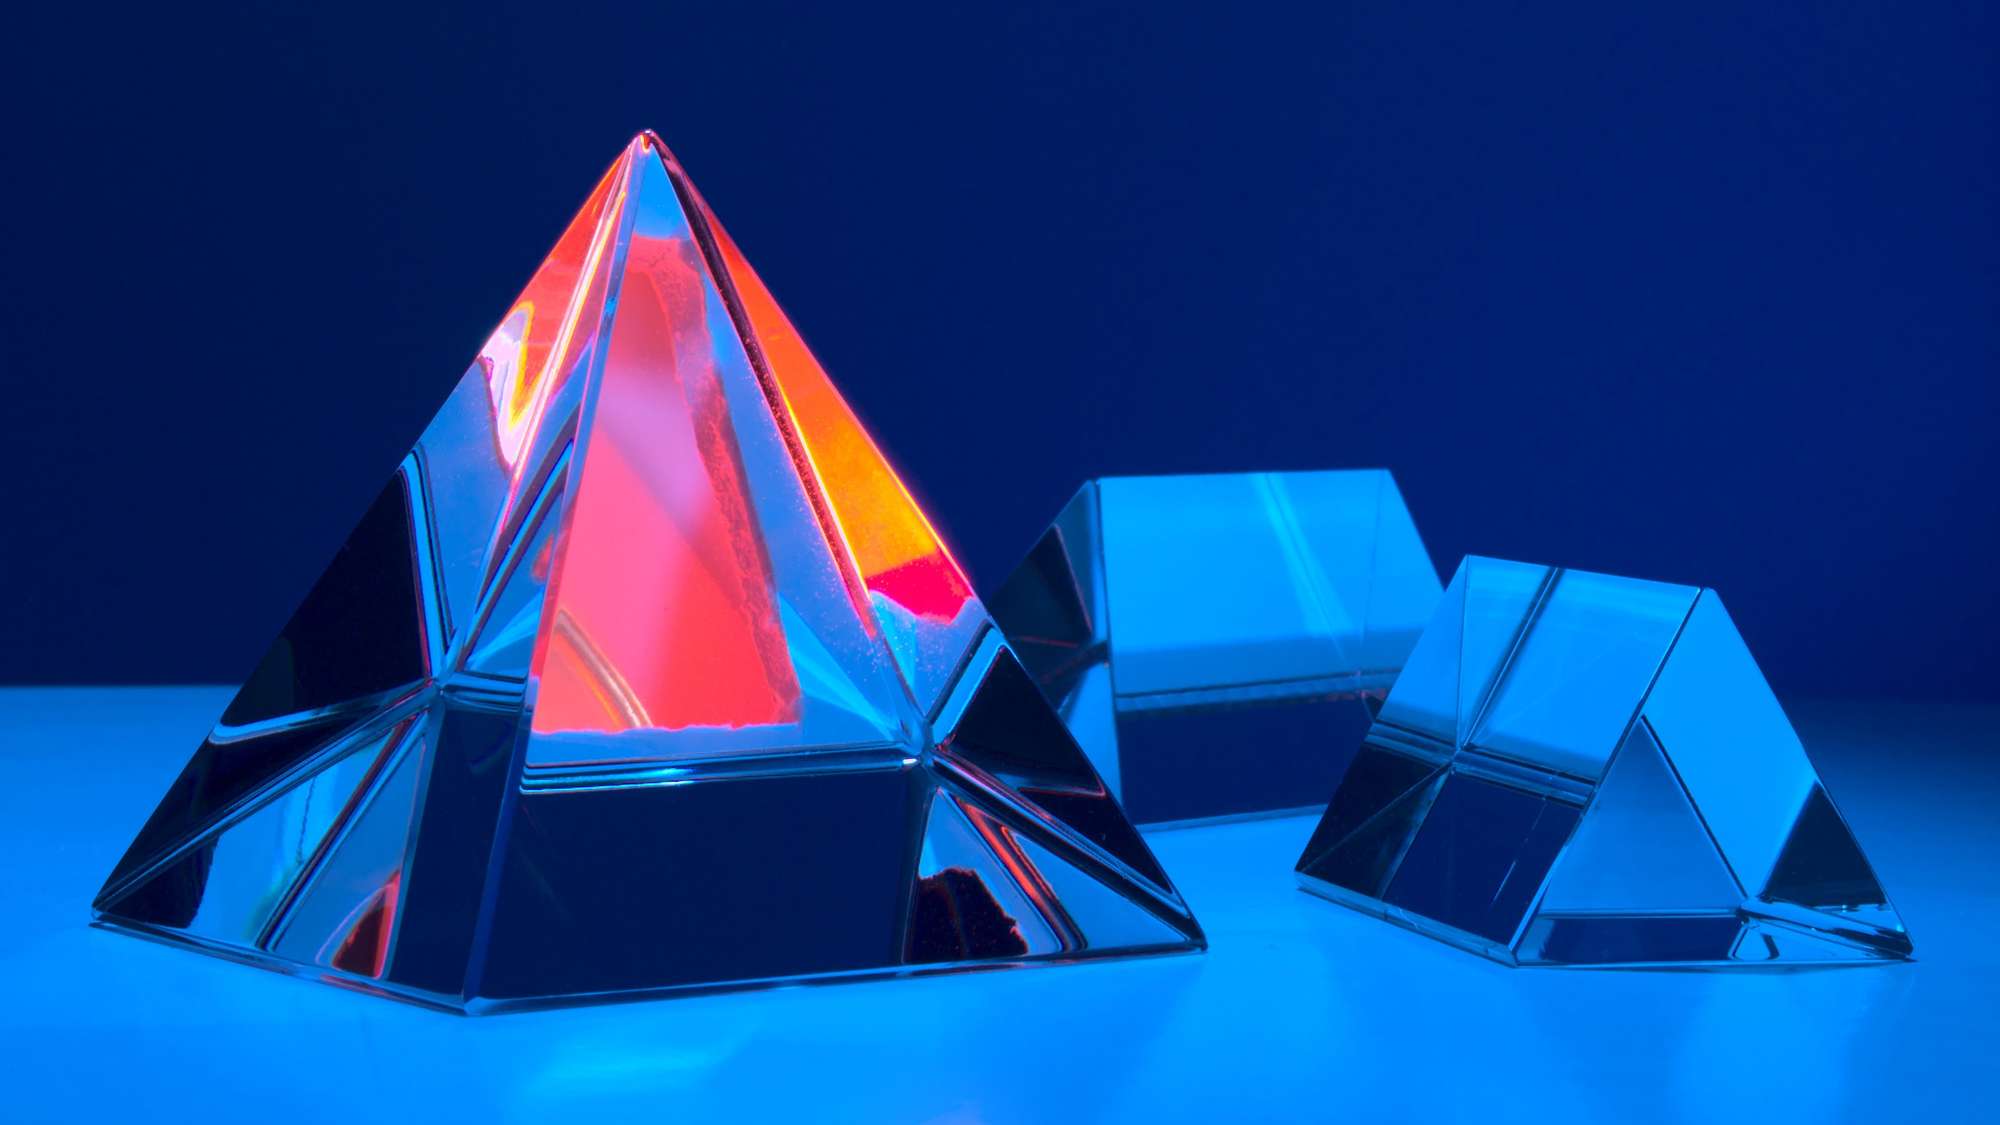 Crystal pyramid shot in studio with colored flashes